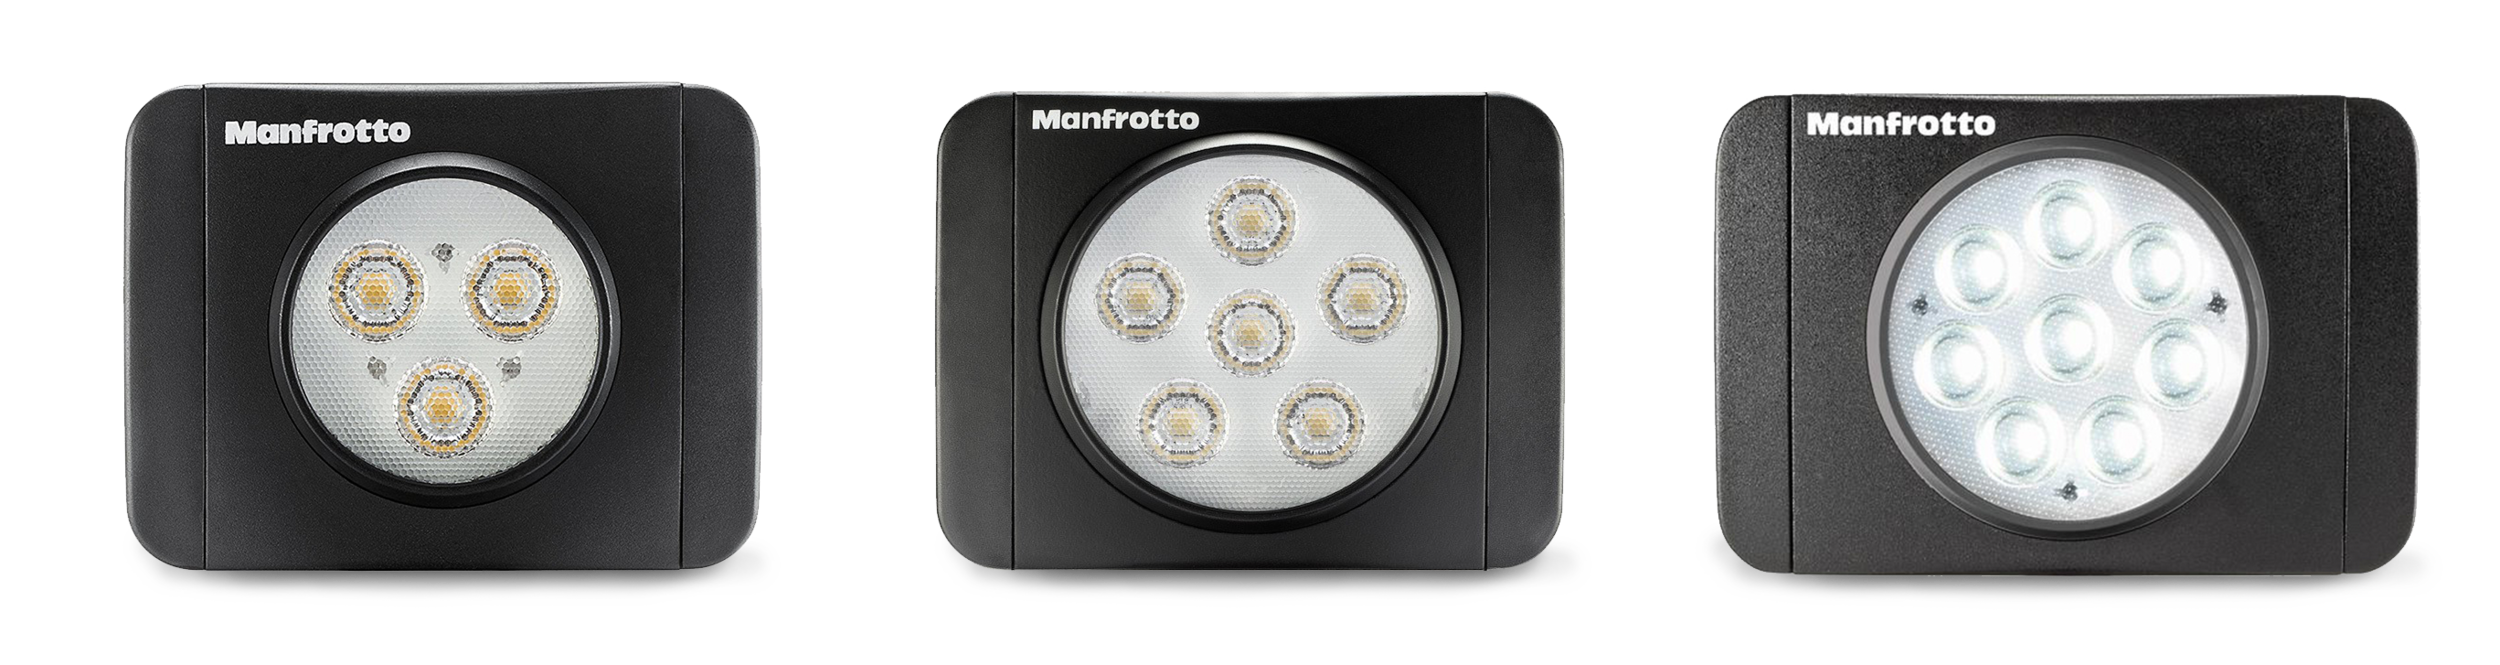 MANFROTTO-LUMIE-RANGE.png